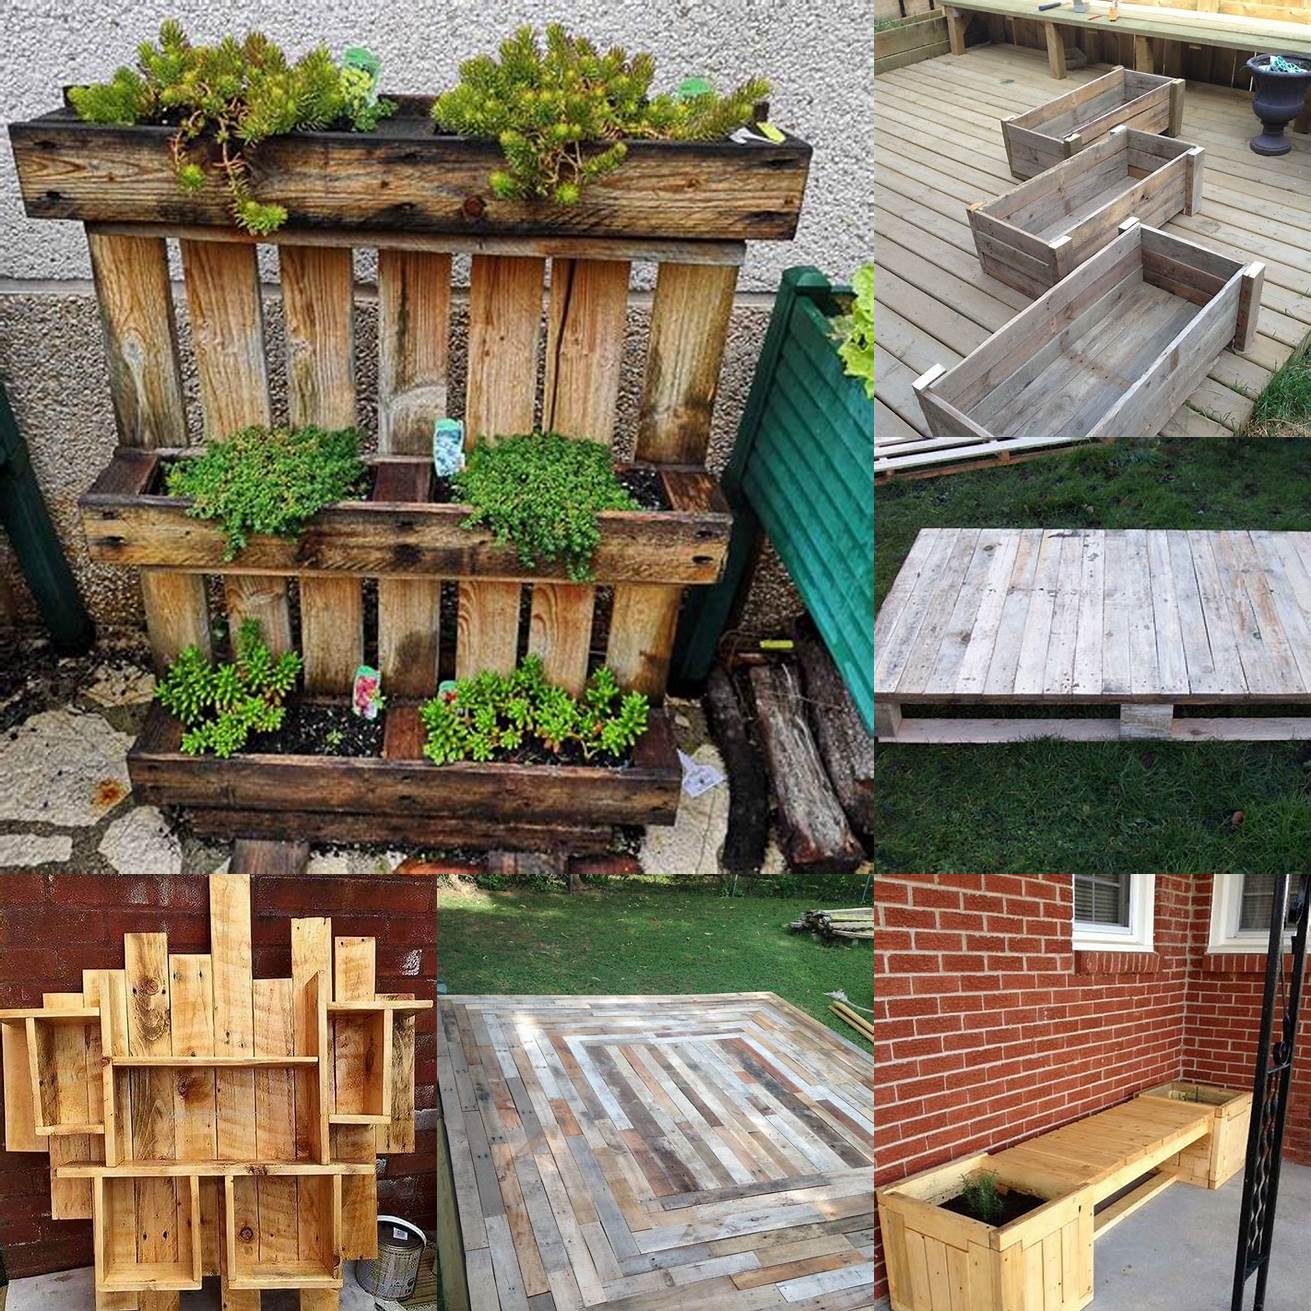 Wooden pallets at least 3